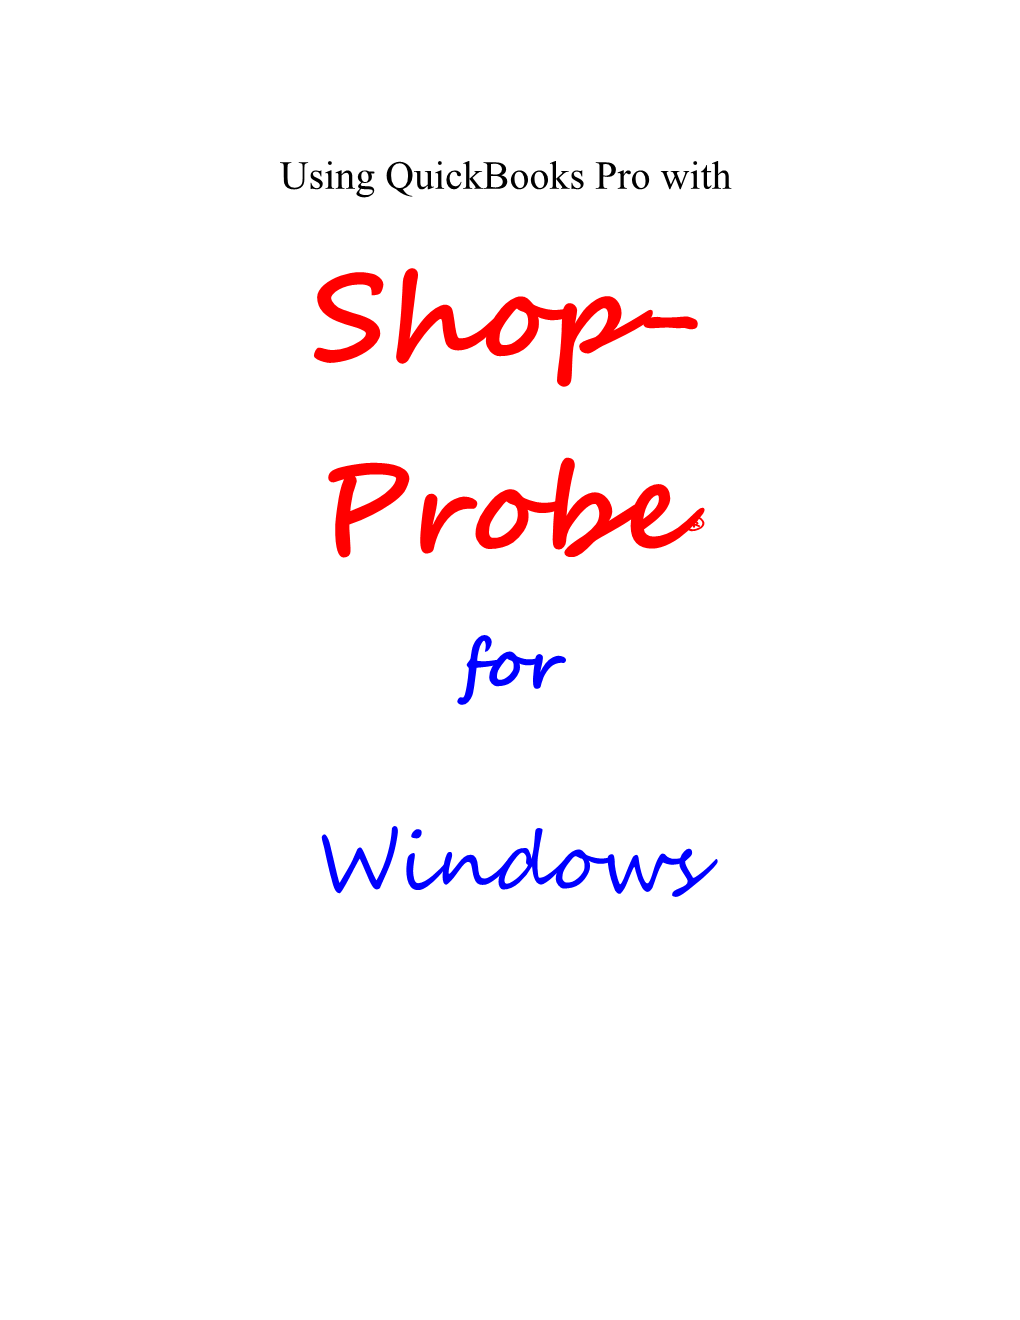 Setting up Quickbooks with Your Shop Probe